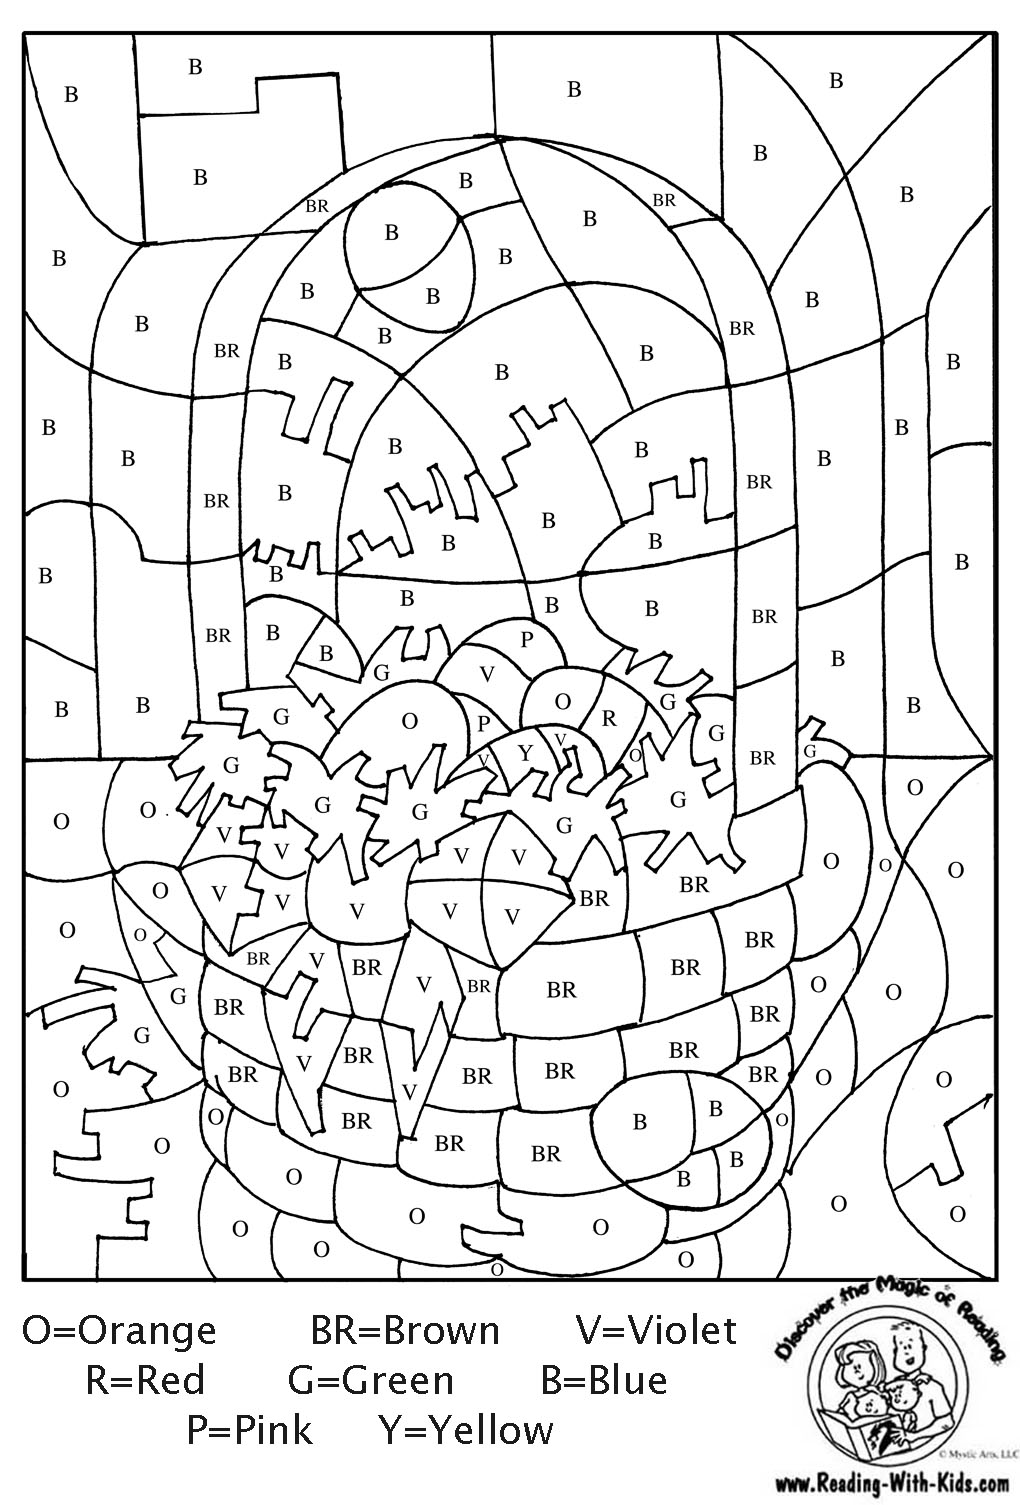 Count By Number Coloring Pages - Free Coloring Pages